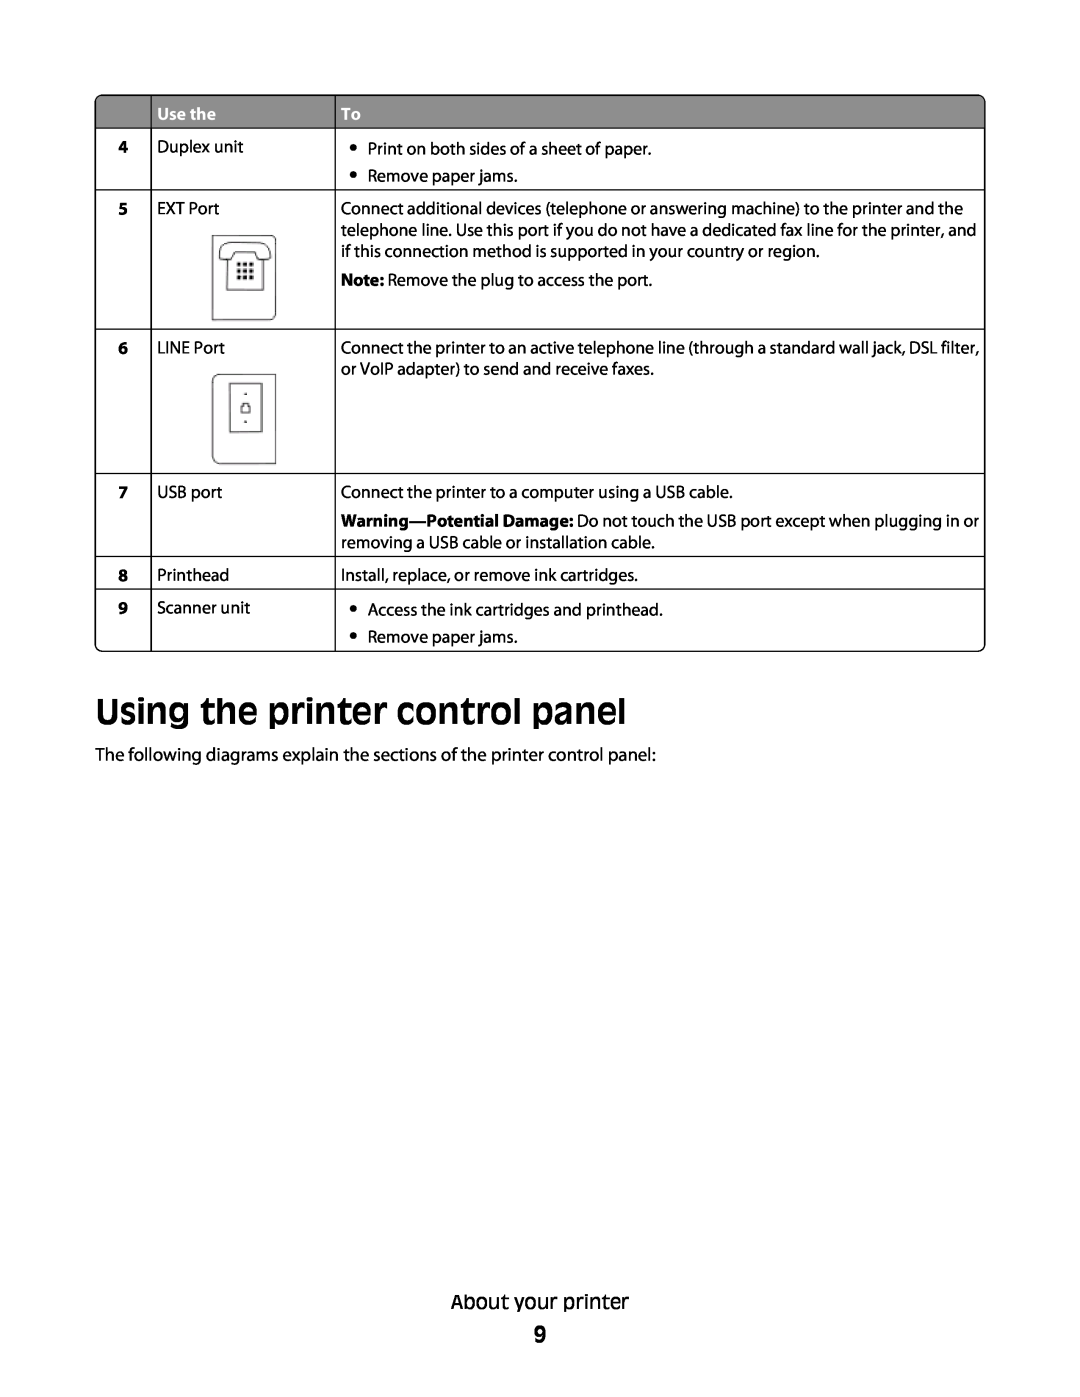 Lexmark Pro208, Pro205, Pro207 manual Using the printer control panel, About your printer, Use the 